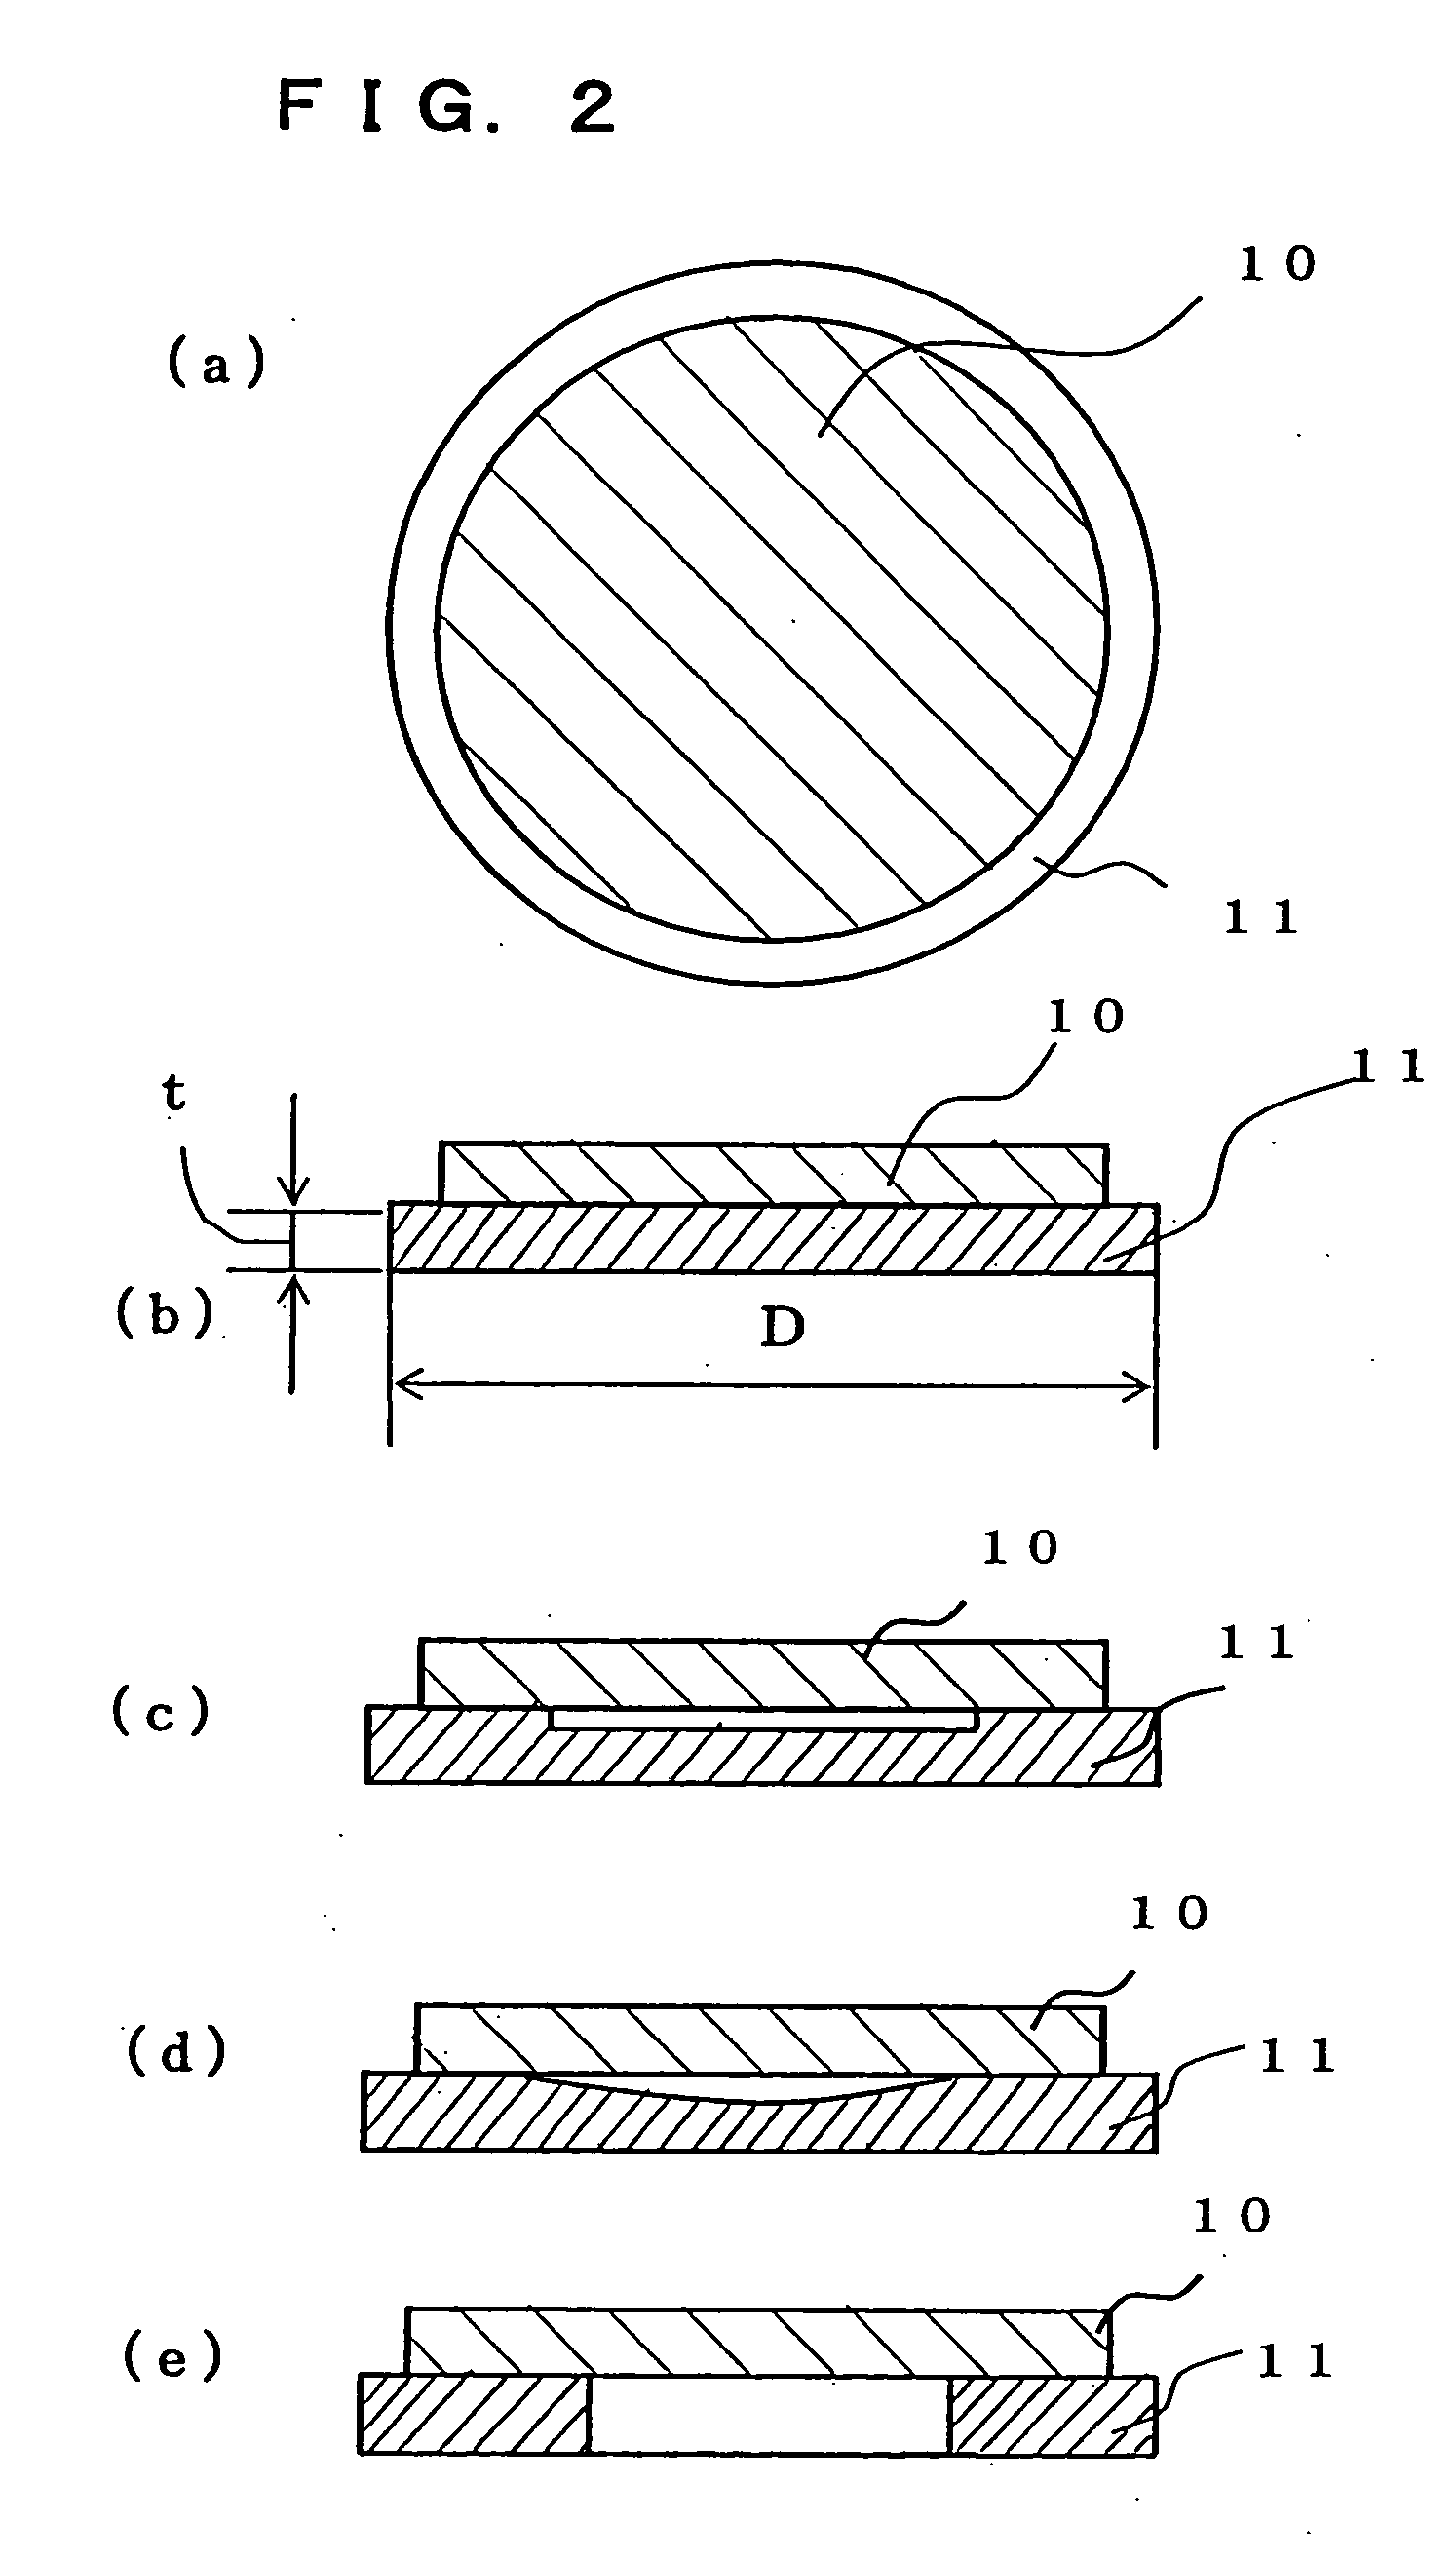 Heat treatment jig for semiconductor wafer